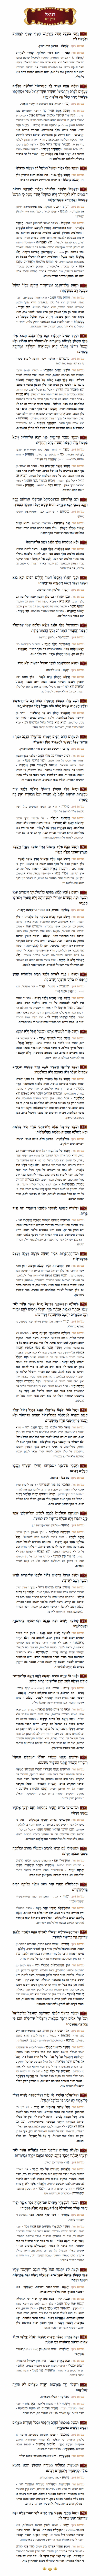 Sefer Daniel Chapter 11 with commentary